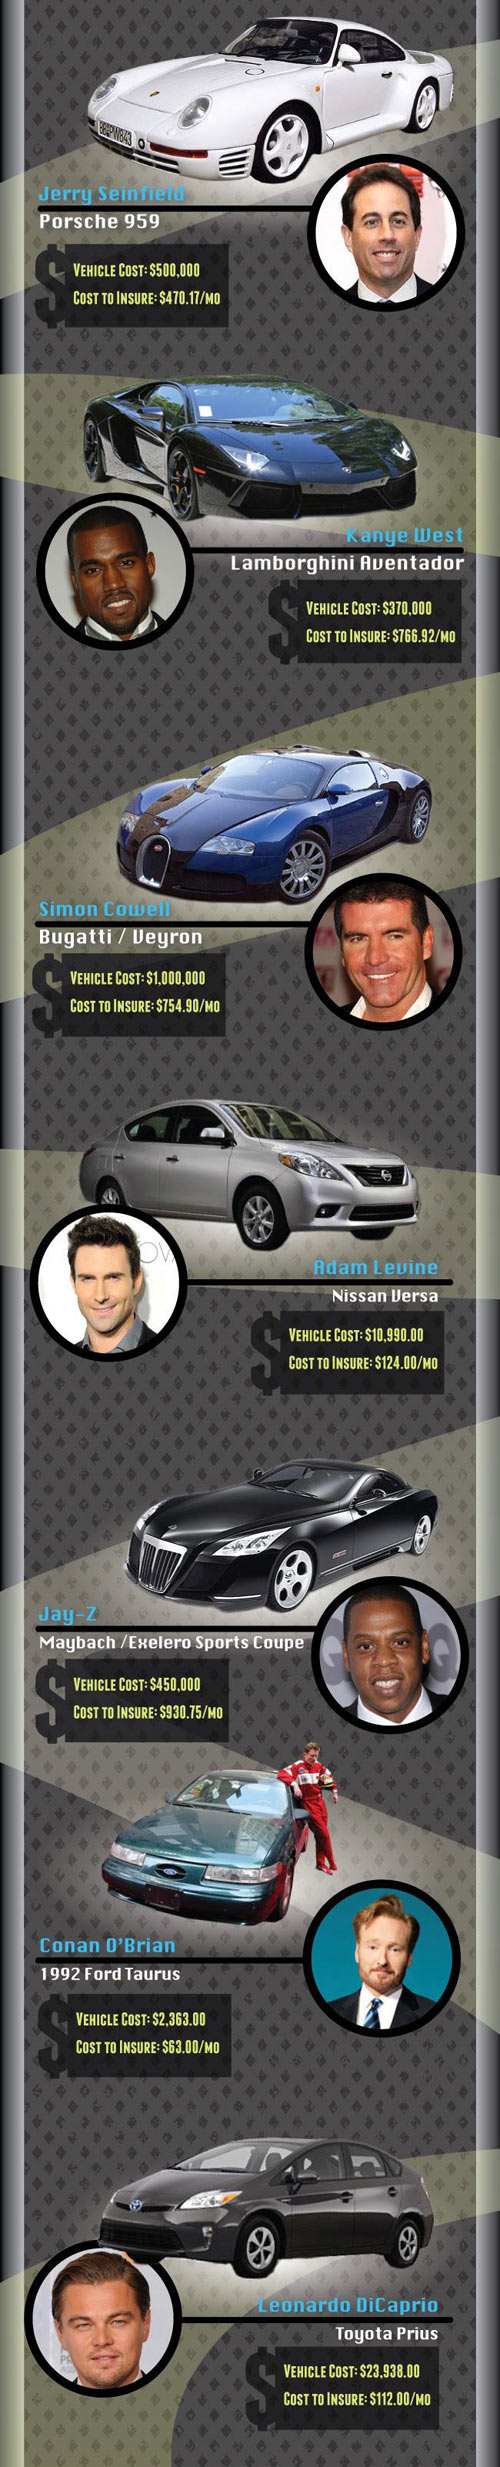 Celebrities and the cars they drive.